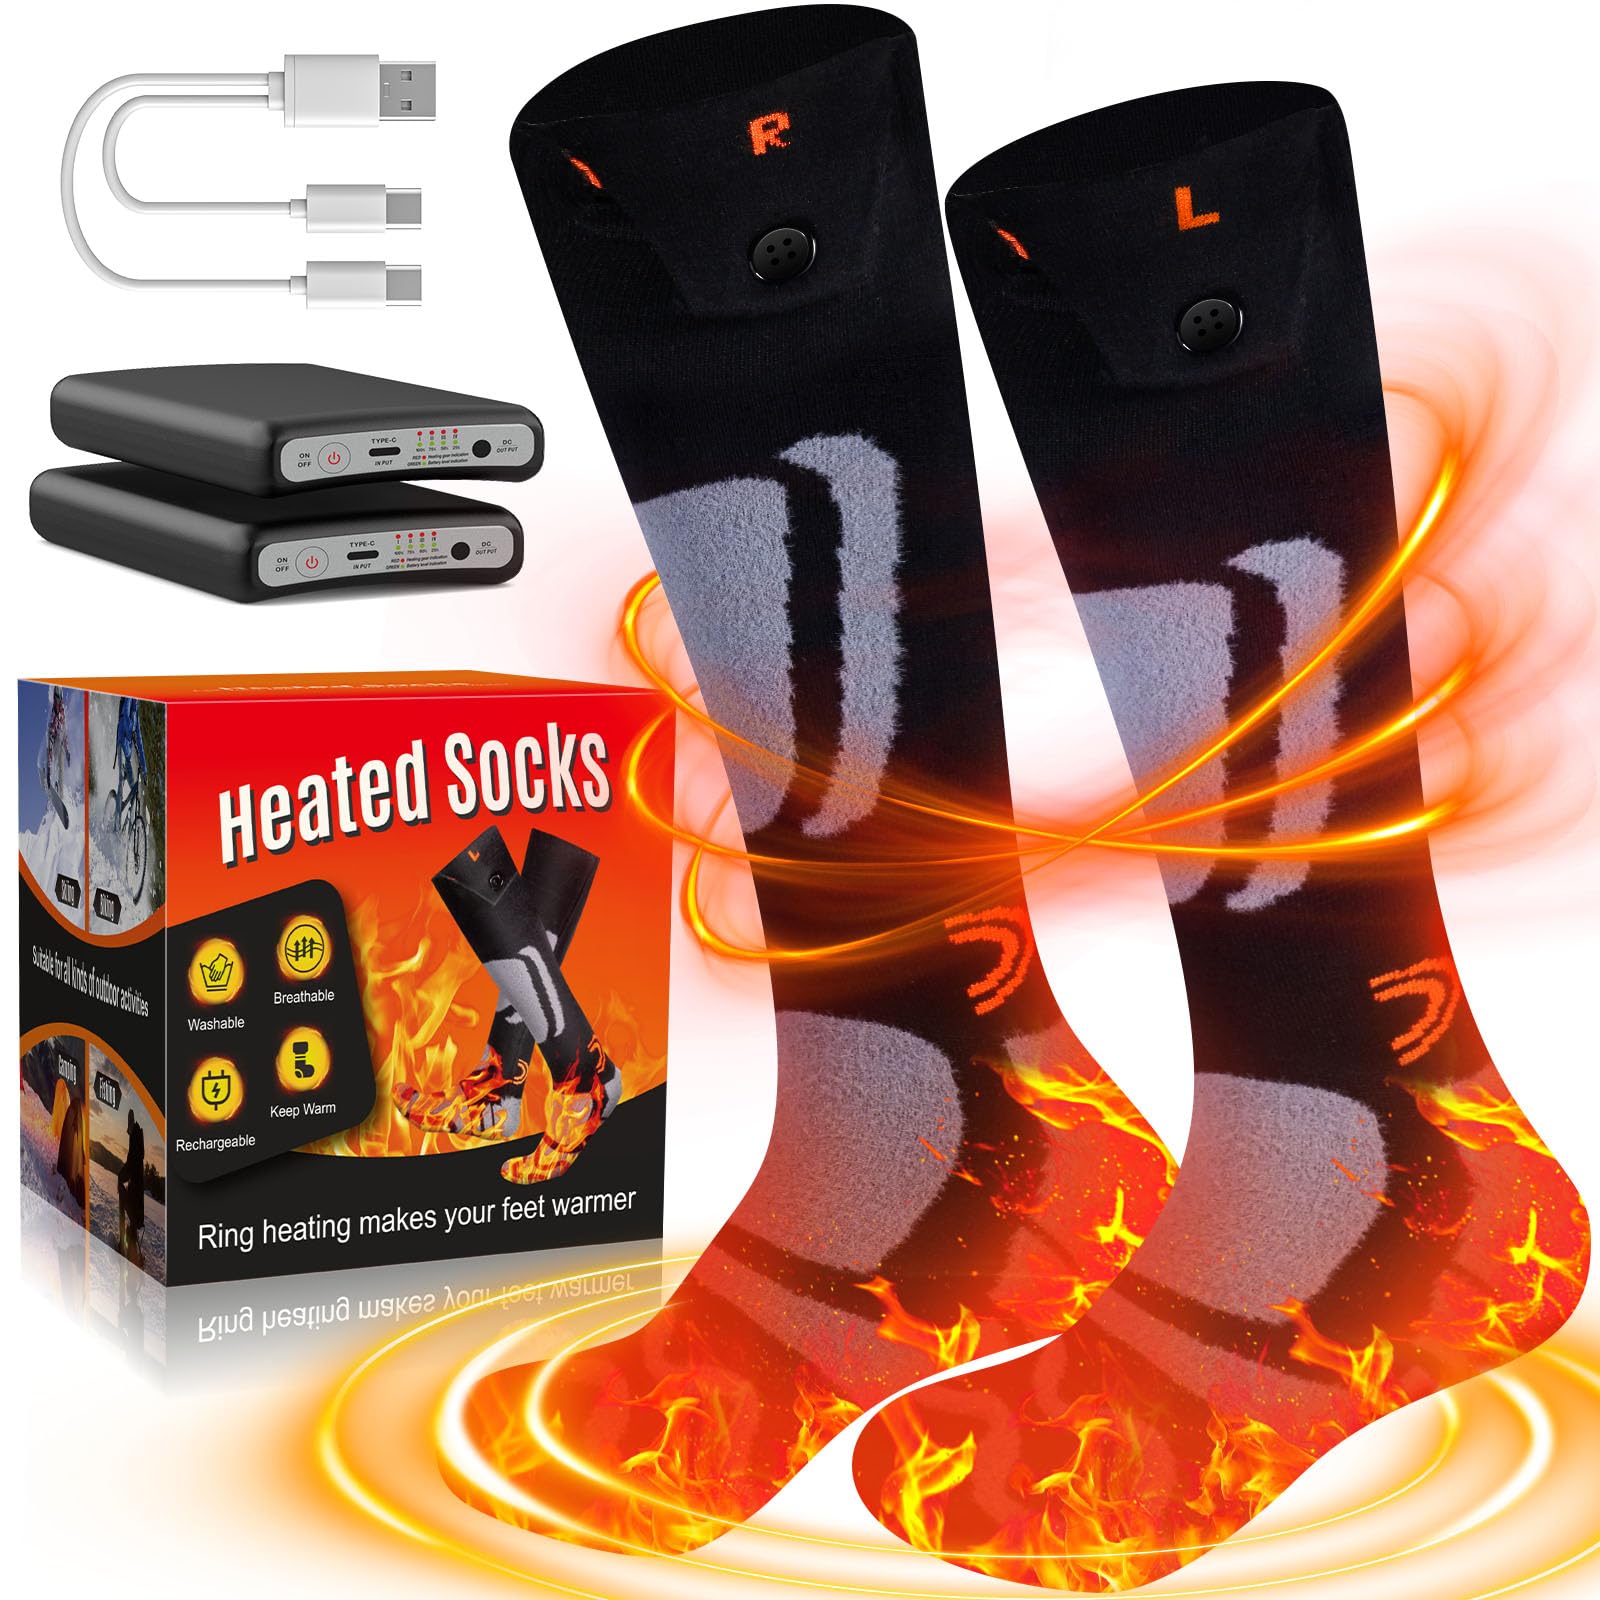 Winter Warm Thermal Electric Heated Socks Washable Unisex Foot Warmers for Hunting Camping Skiing Hiking Outdoors